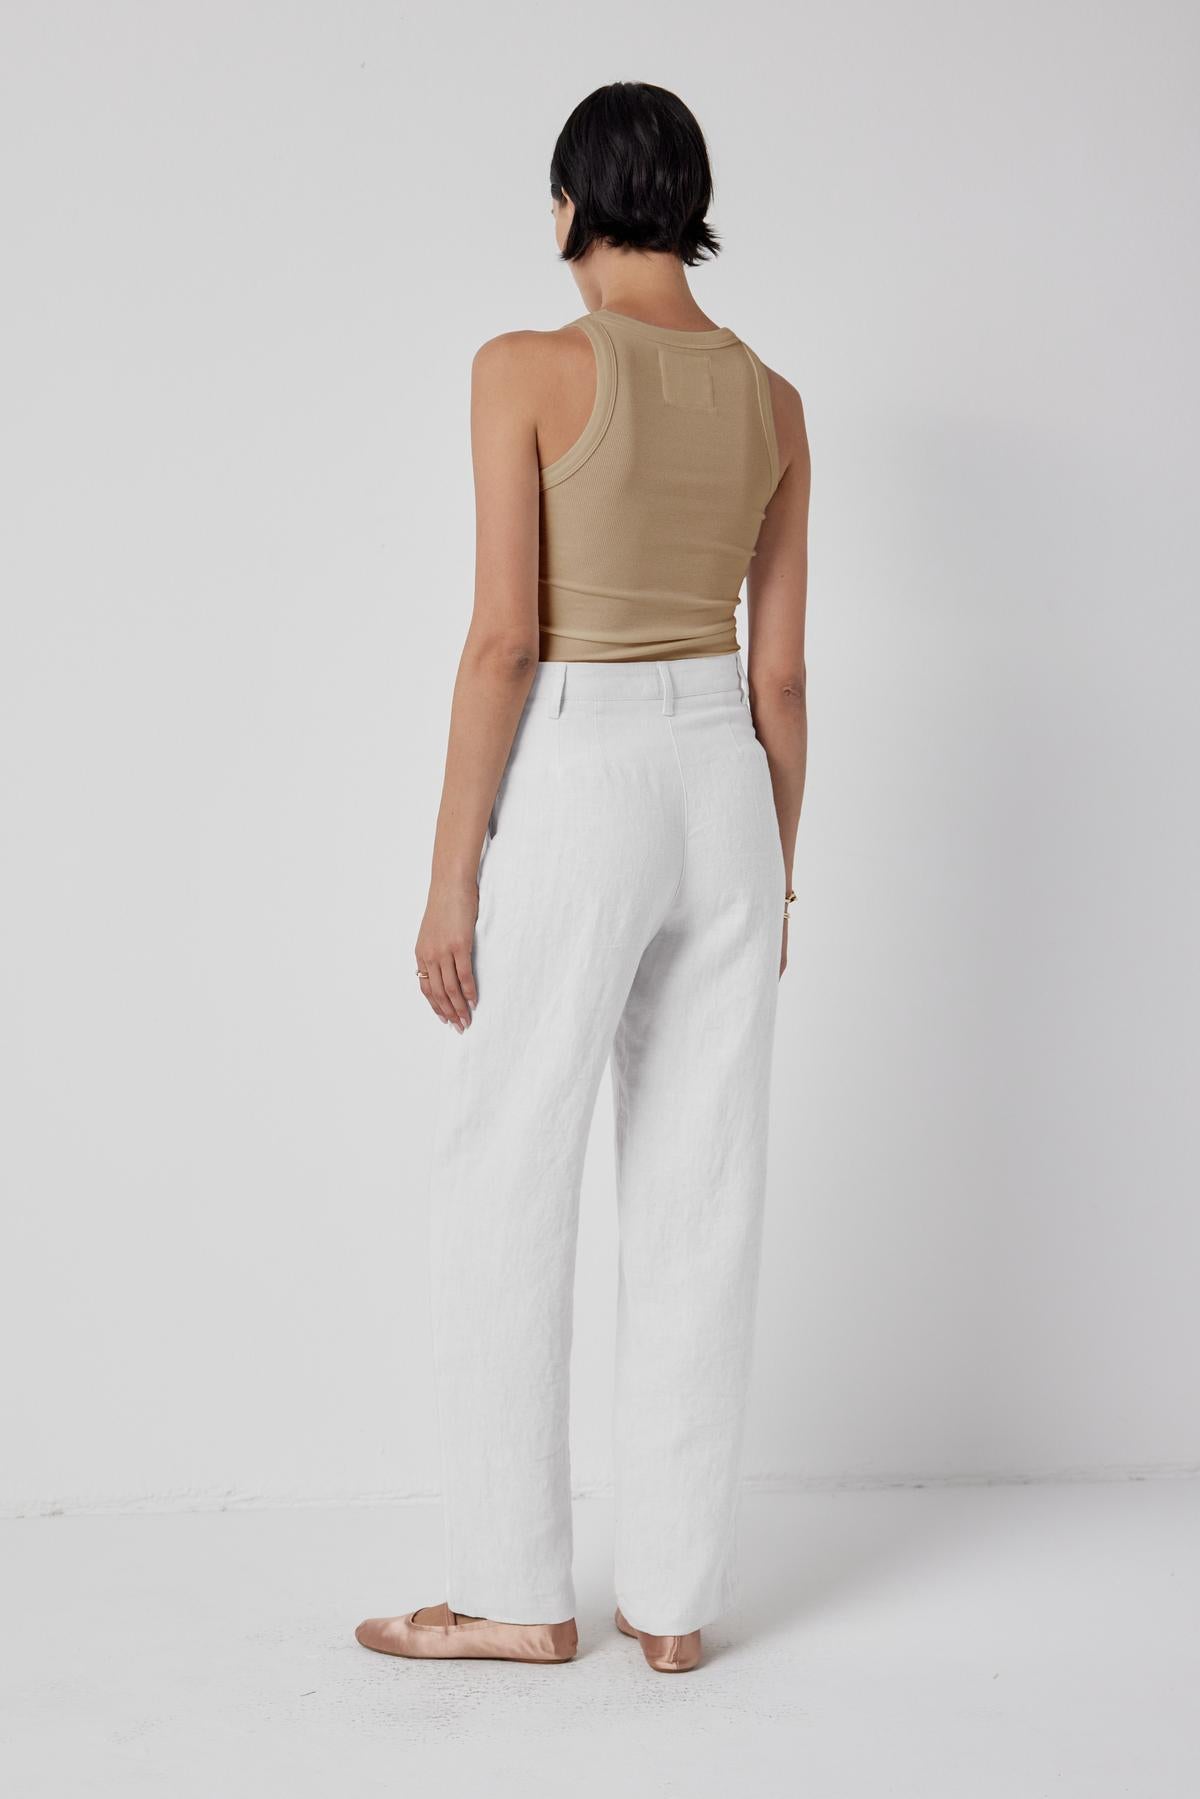 Woman standing in a white studio wearing white pants and a chic beige heavy rib CRUZ tank top by Velvet by Jenny Graham, viewed from behind.-36463435284673